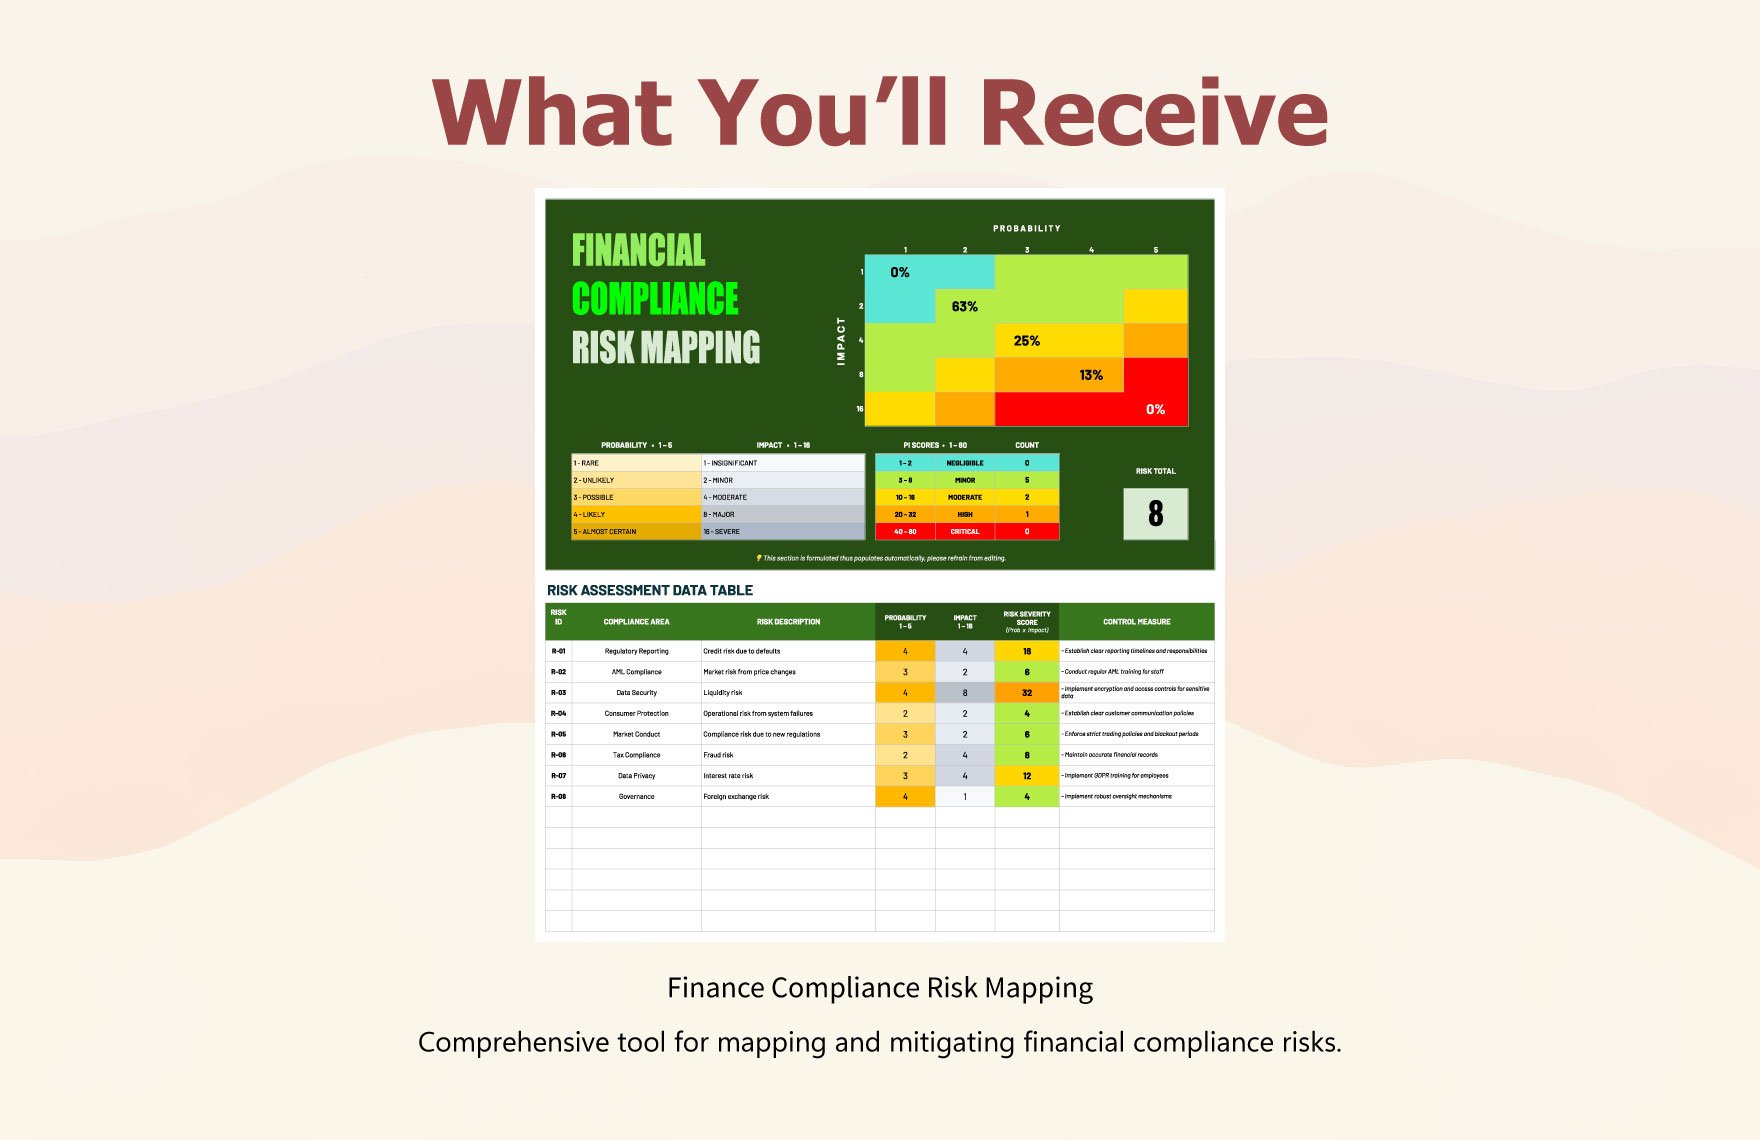 Financial Compliance Risk Mapping Template